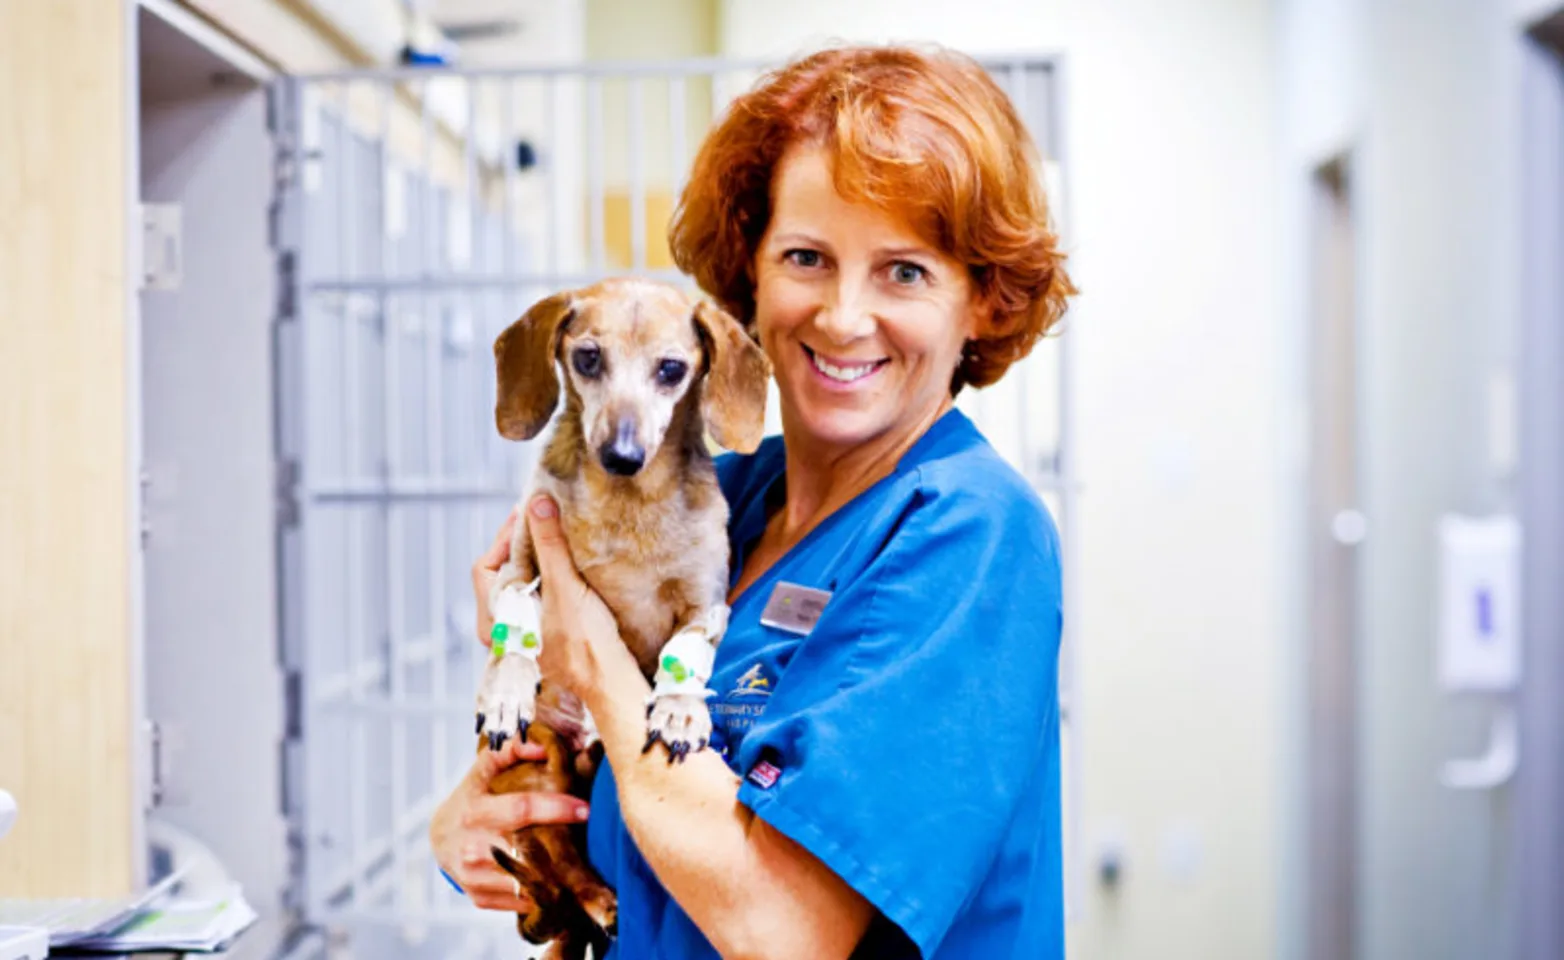 Staff member holding a small dog